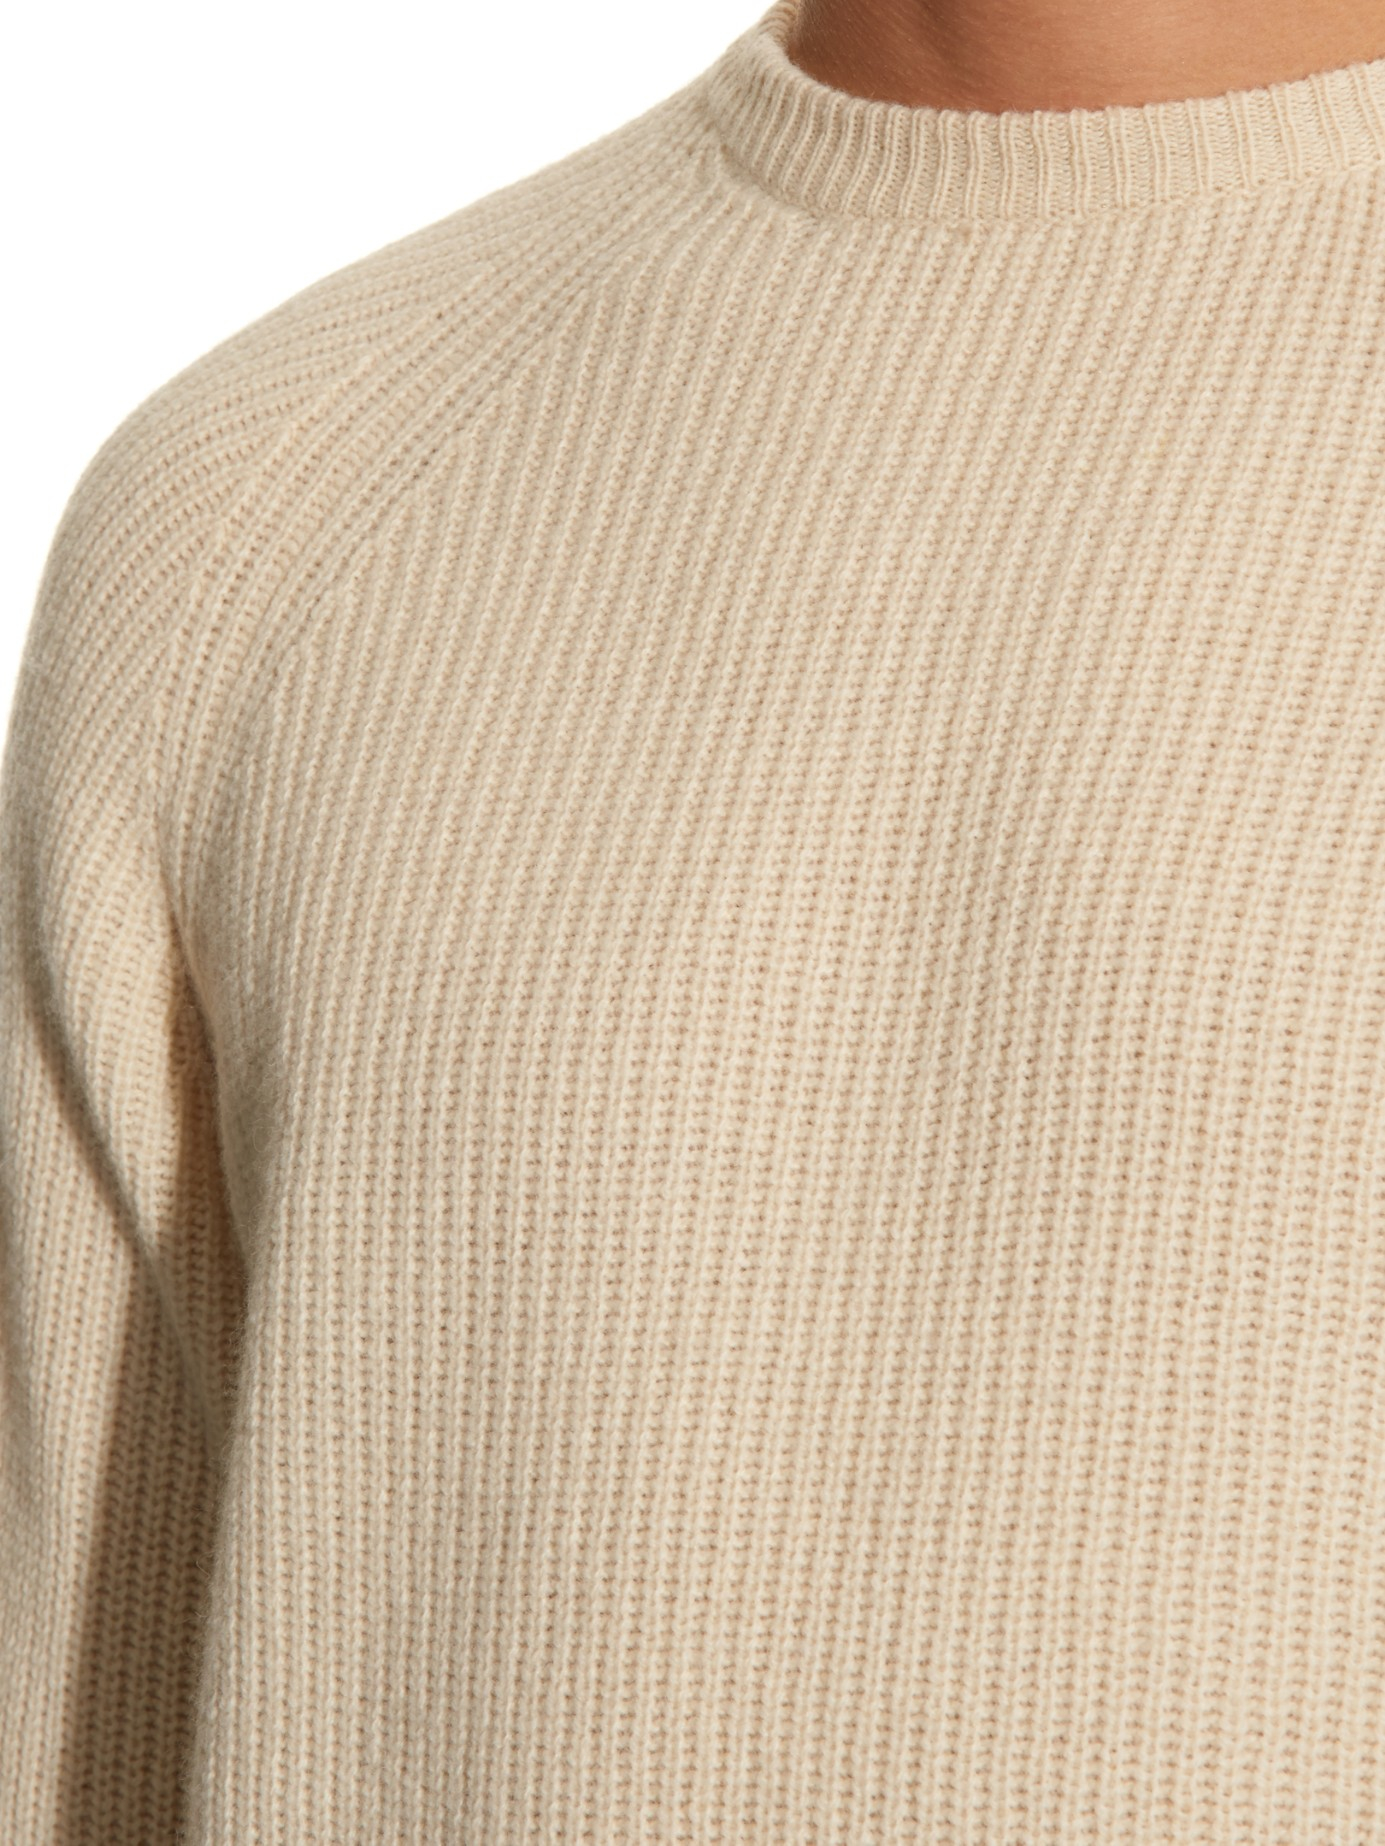 Lyst - Lemaire Wool-blend Ribbed-knit Sweater in Natural for Men